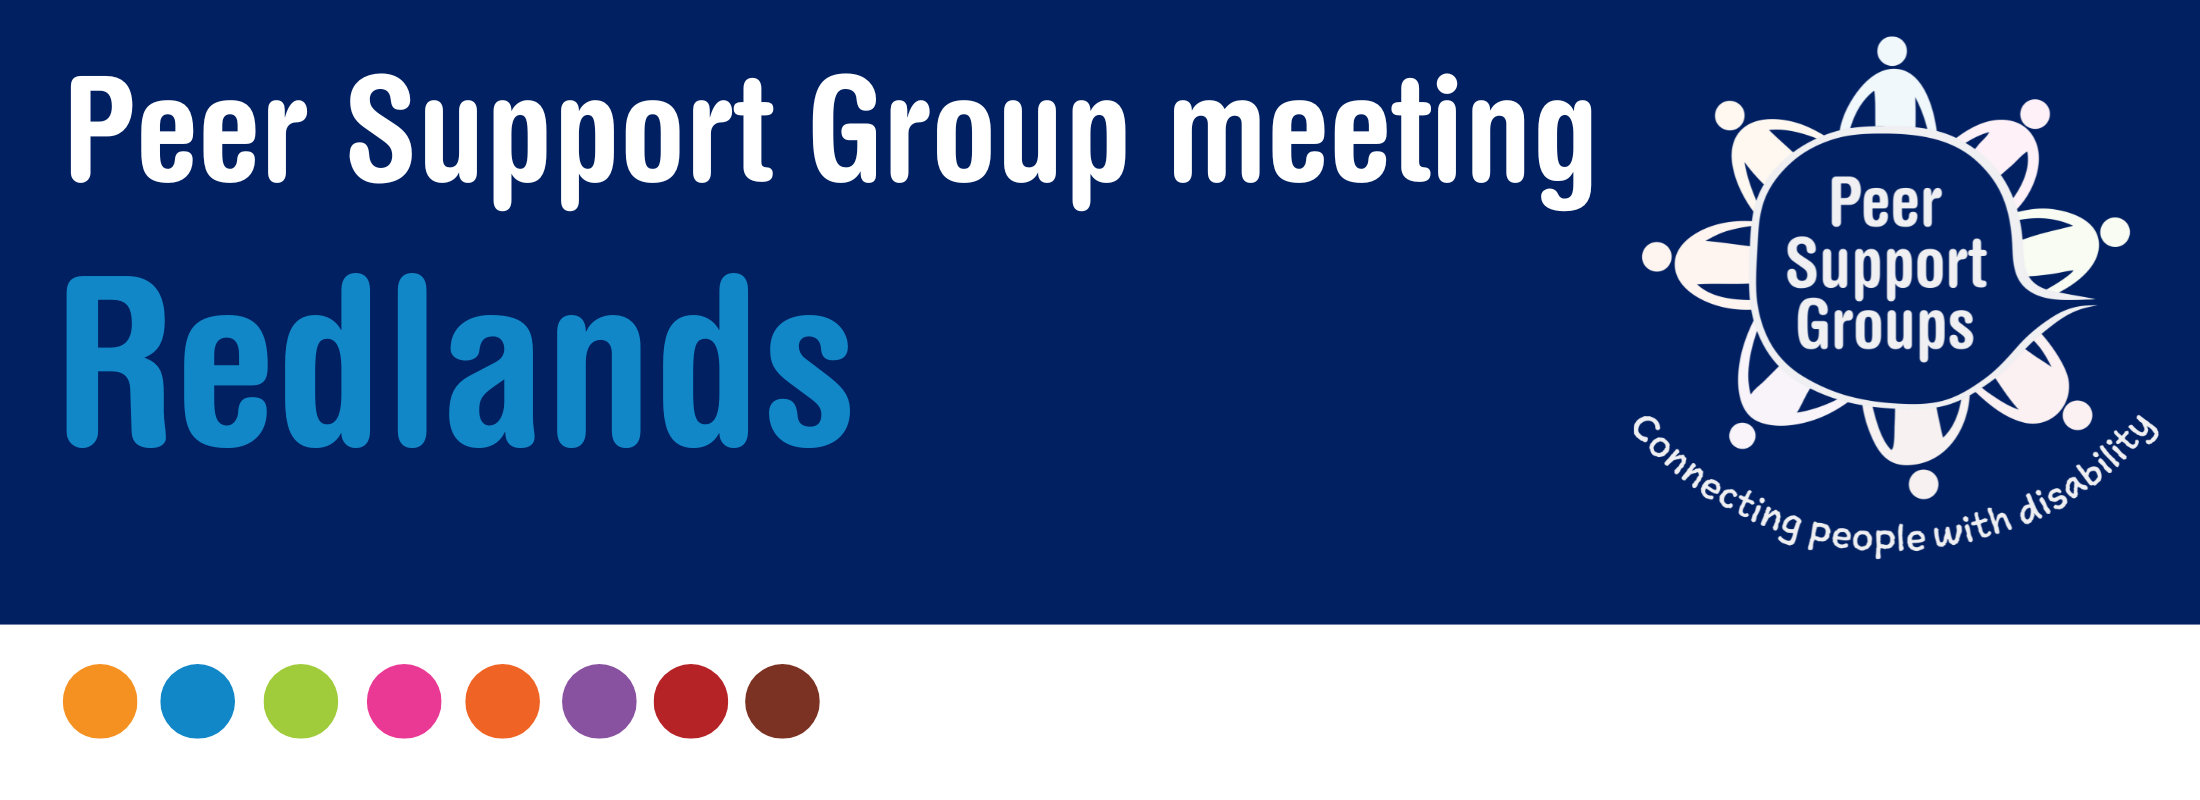 The image shows an event banner with blue and white background. Text says, Peer Support Group meeting Redlands. Peer Support Groups logo at the right side.